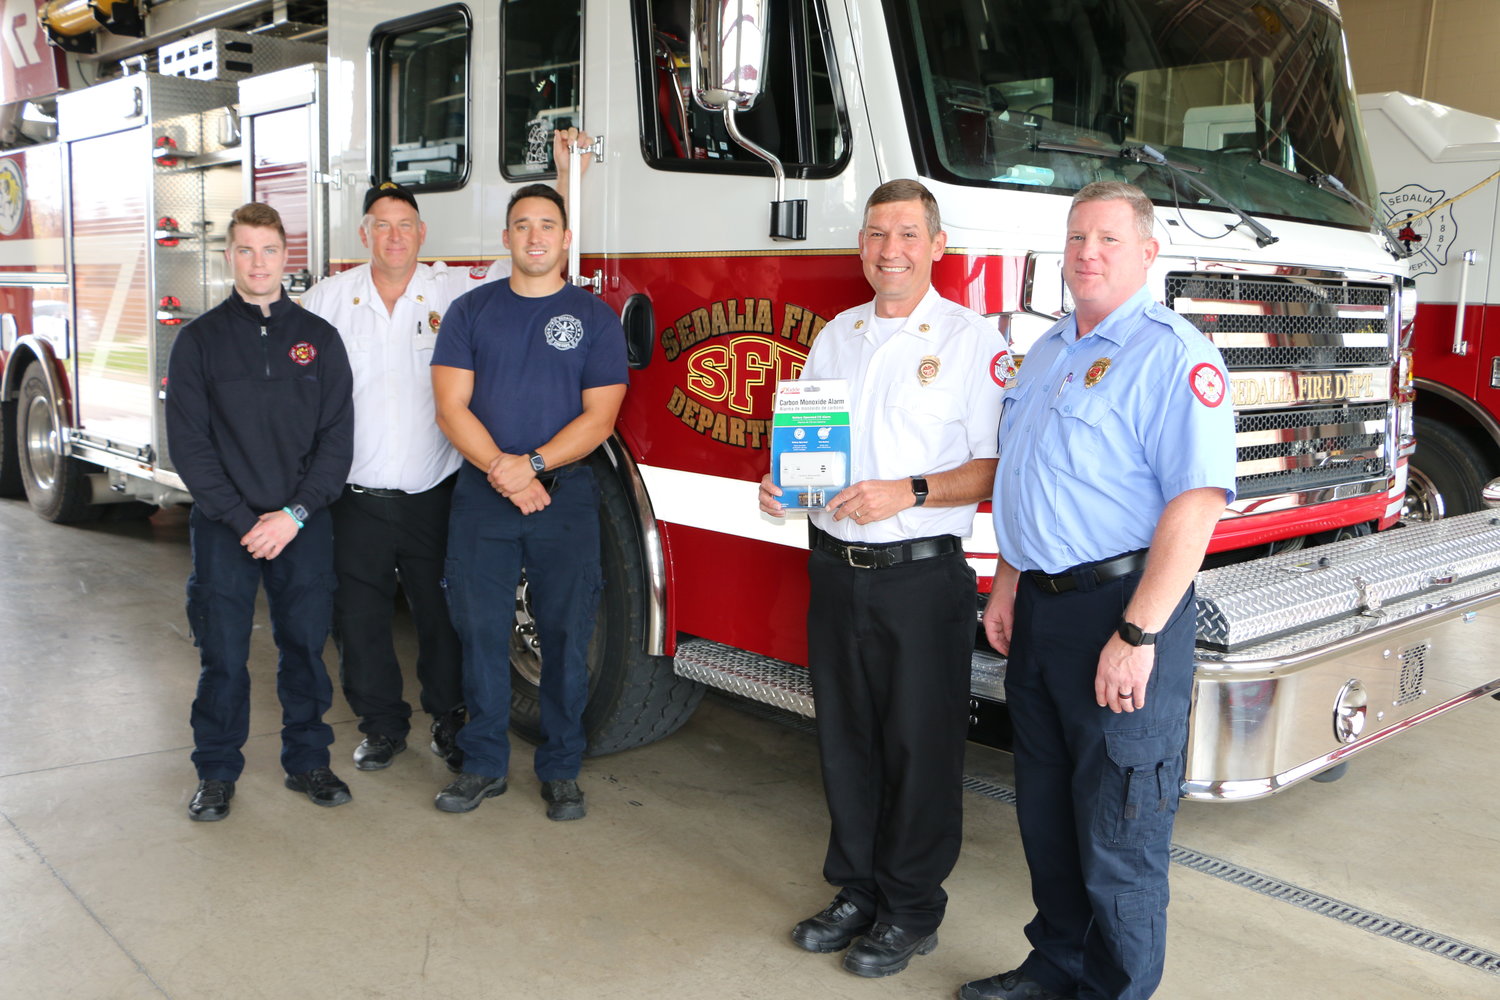 The Sedalia Fire Department has free carbon monoxide alarms available to the public through its fire prevention and education program. Department members also visit schools and businesses to provide education and training. From left, Firefighter Brennan Akeson, Battalion Chief Ken Schlesselman, Firefighter Matt Kowalski, Chief Matt Irwin and Inspector Jamie Volk.